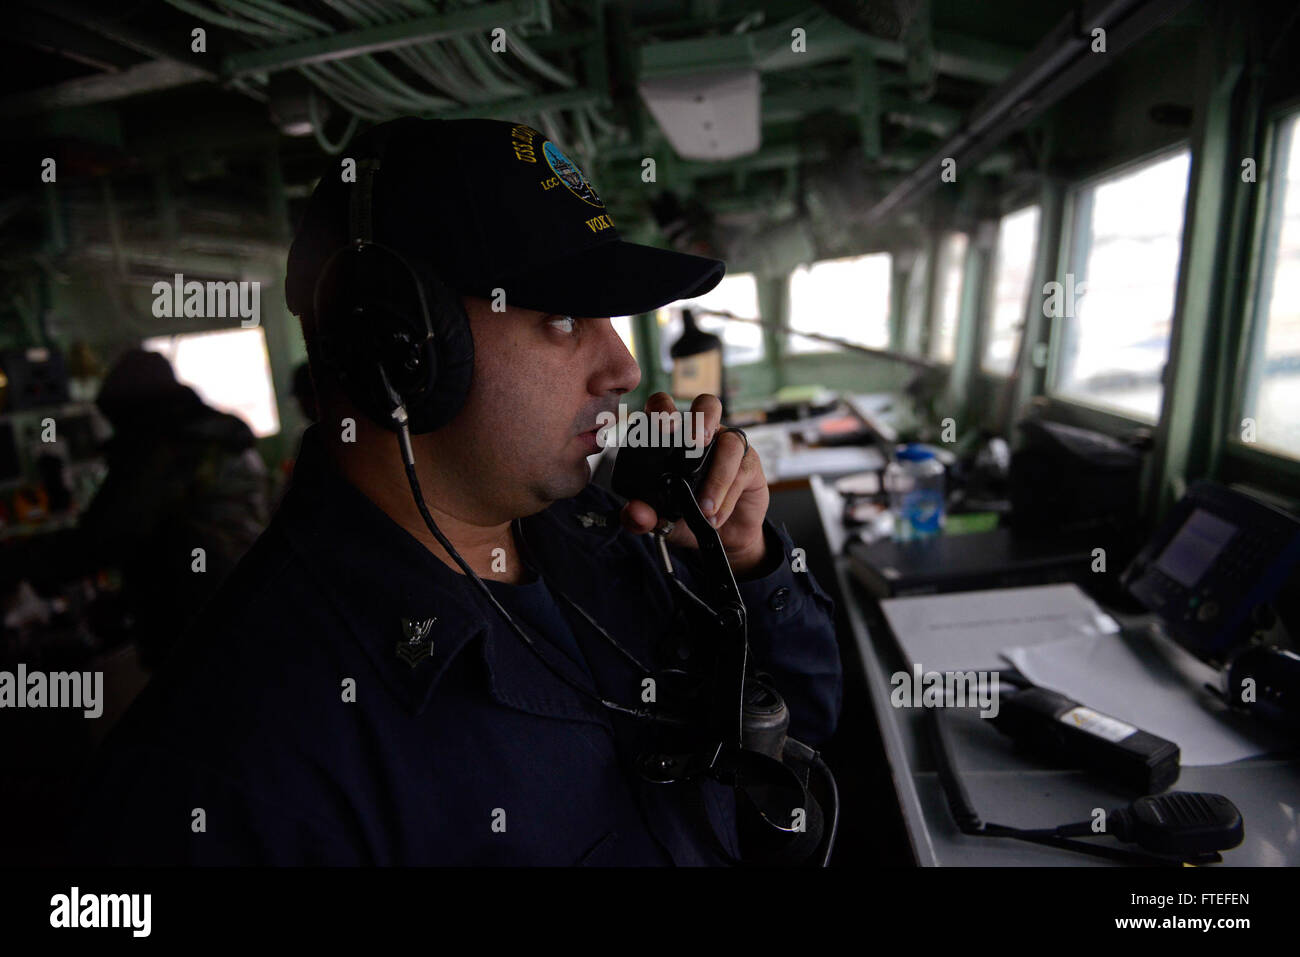 151101-N-VY489-005 LISBON, Portugal (Nov. 01, 2015) Operations Specialist 1st Class Gabriel Torres relays information on the bridge, as the U.S. 6th Fleet command and control ship USS Mount Whitney (LCC 20) prepares to enter port in Lisbon, Portugal, Nov. 01,  2015. Mount Whitney, forward deployed to Gaeta, Italy, operates with a combined crew of Sailors and Military Sealift Command civil service mariners. (U.S. Navy photo by Mass Communication Specialist 1st Class Mike Wright/ Released) Stock Photo